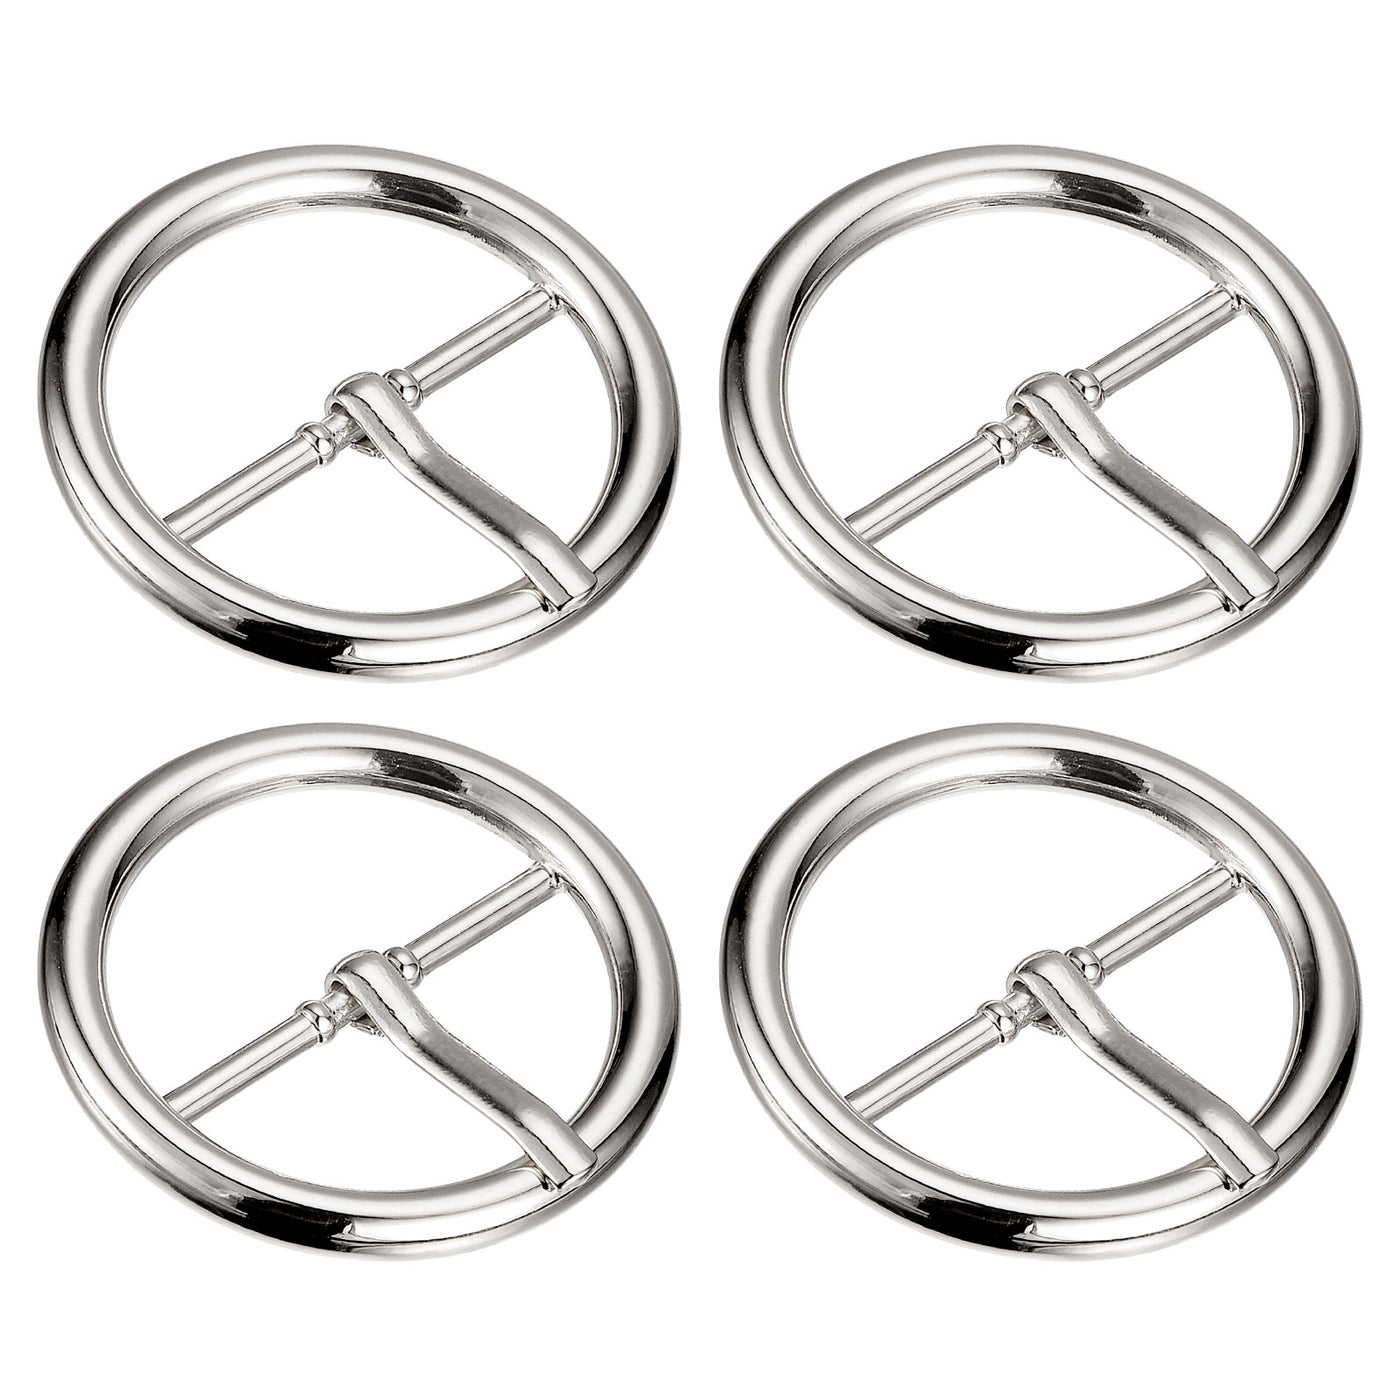 uxcell Uxcell 4Pcs 1.18" Single Prong Belt Buckle Round Center Bar Buckles for Belt, Silver